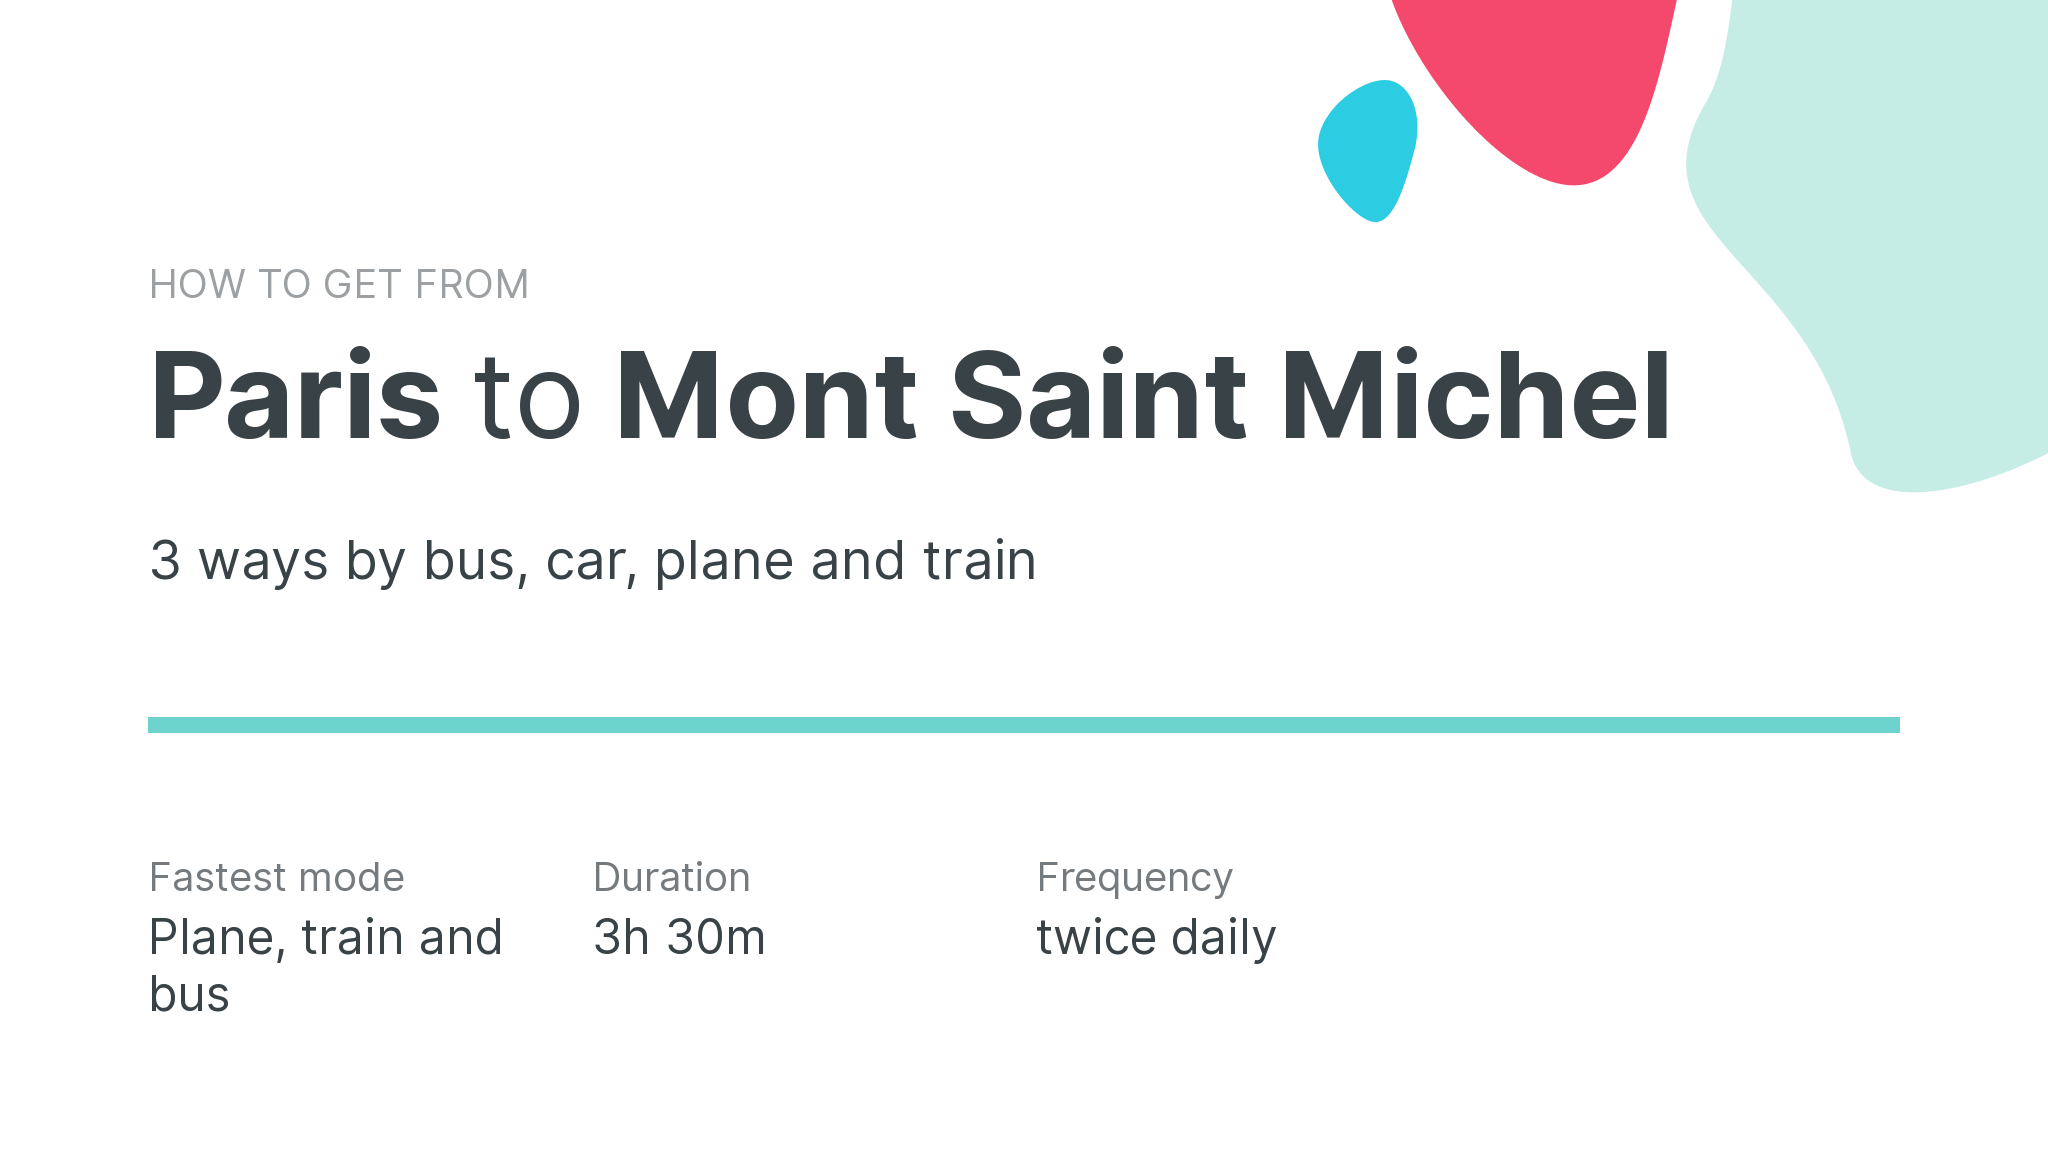 How do I get from Paris to Mont Saint Michel